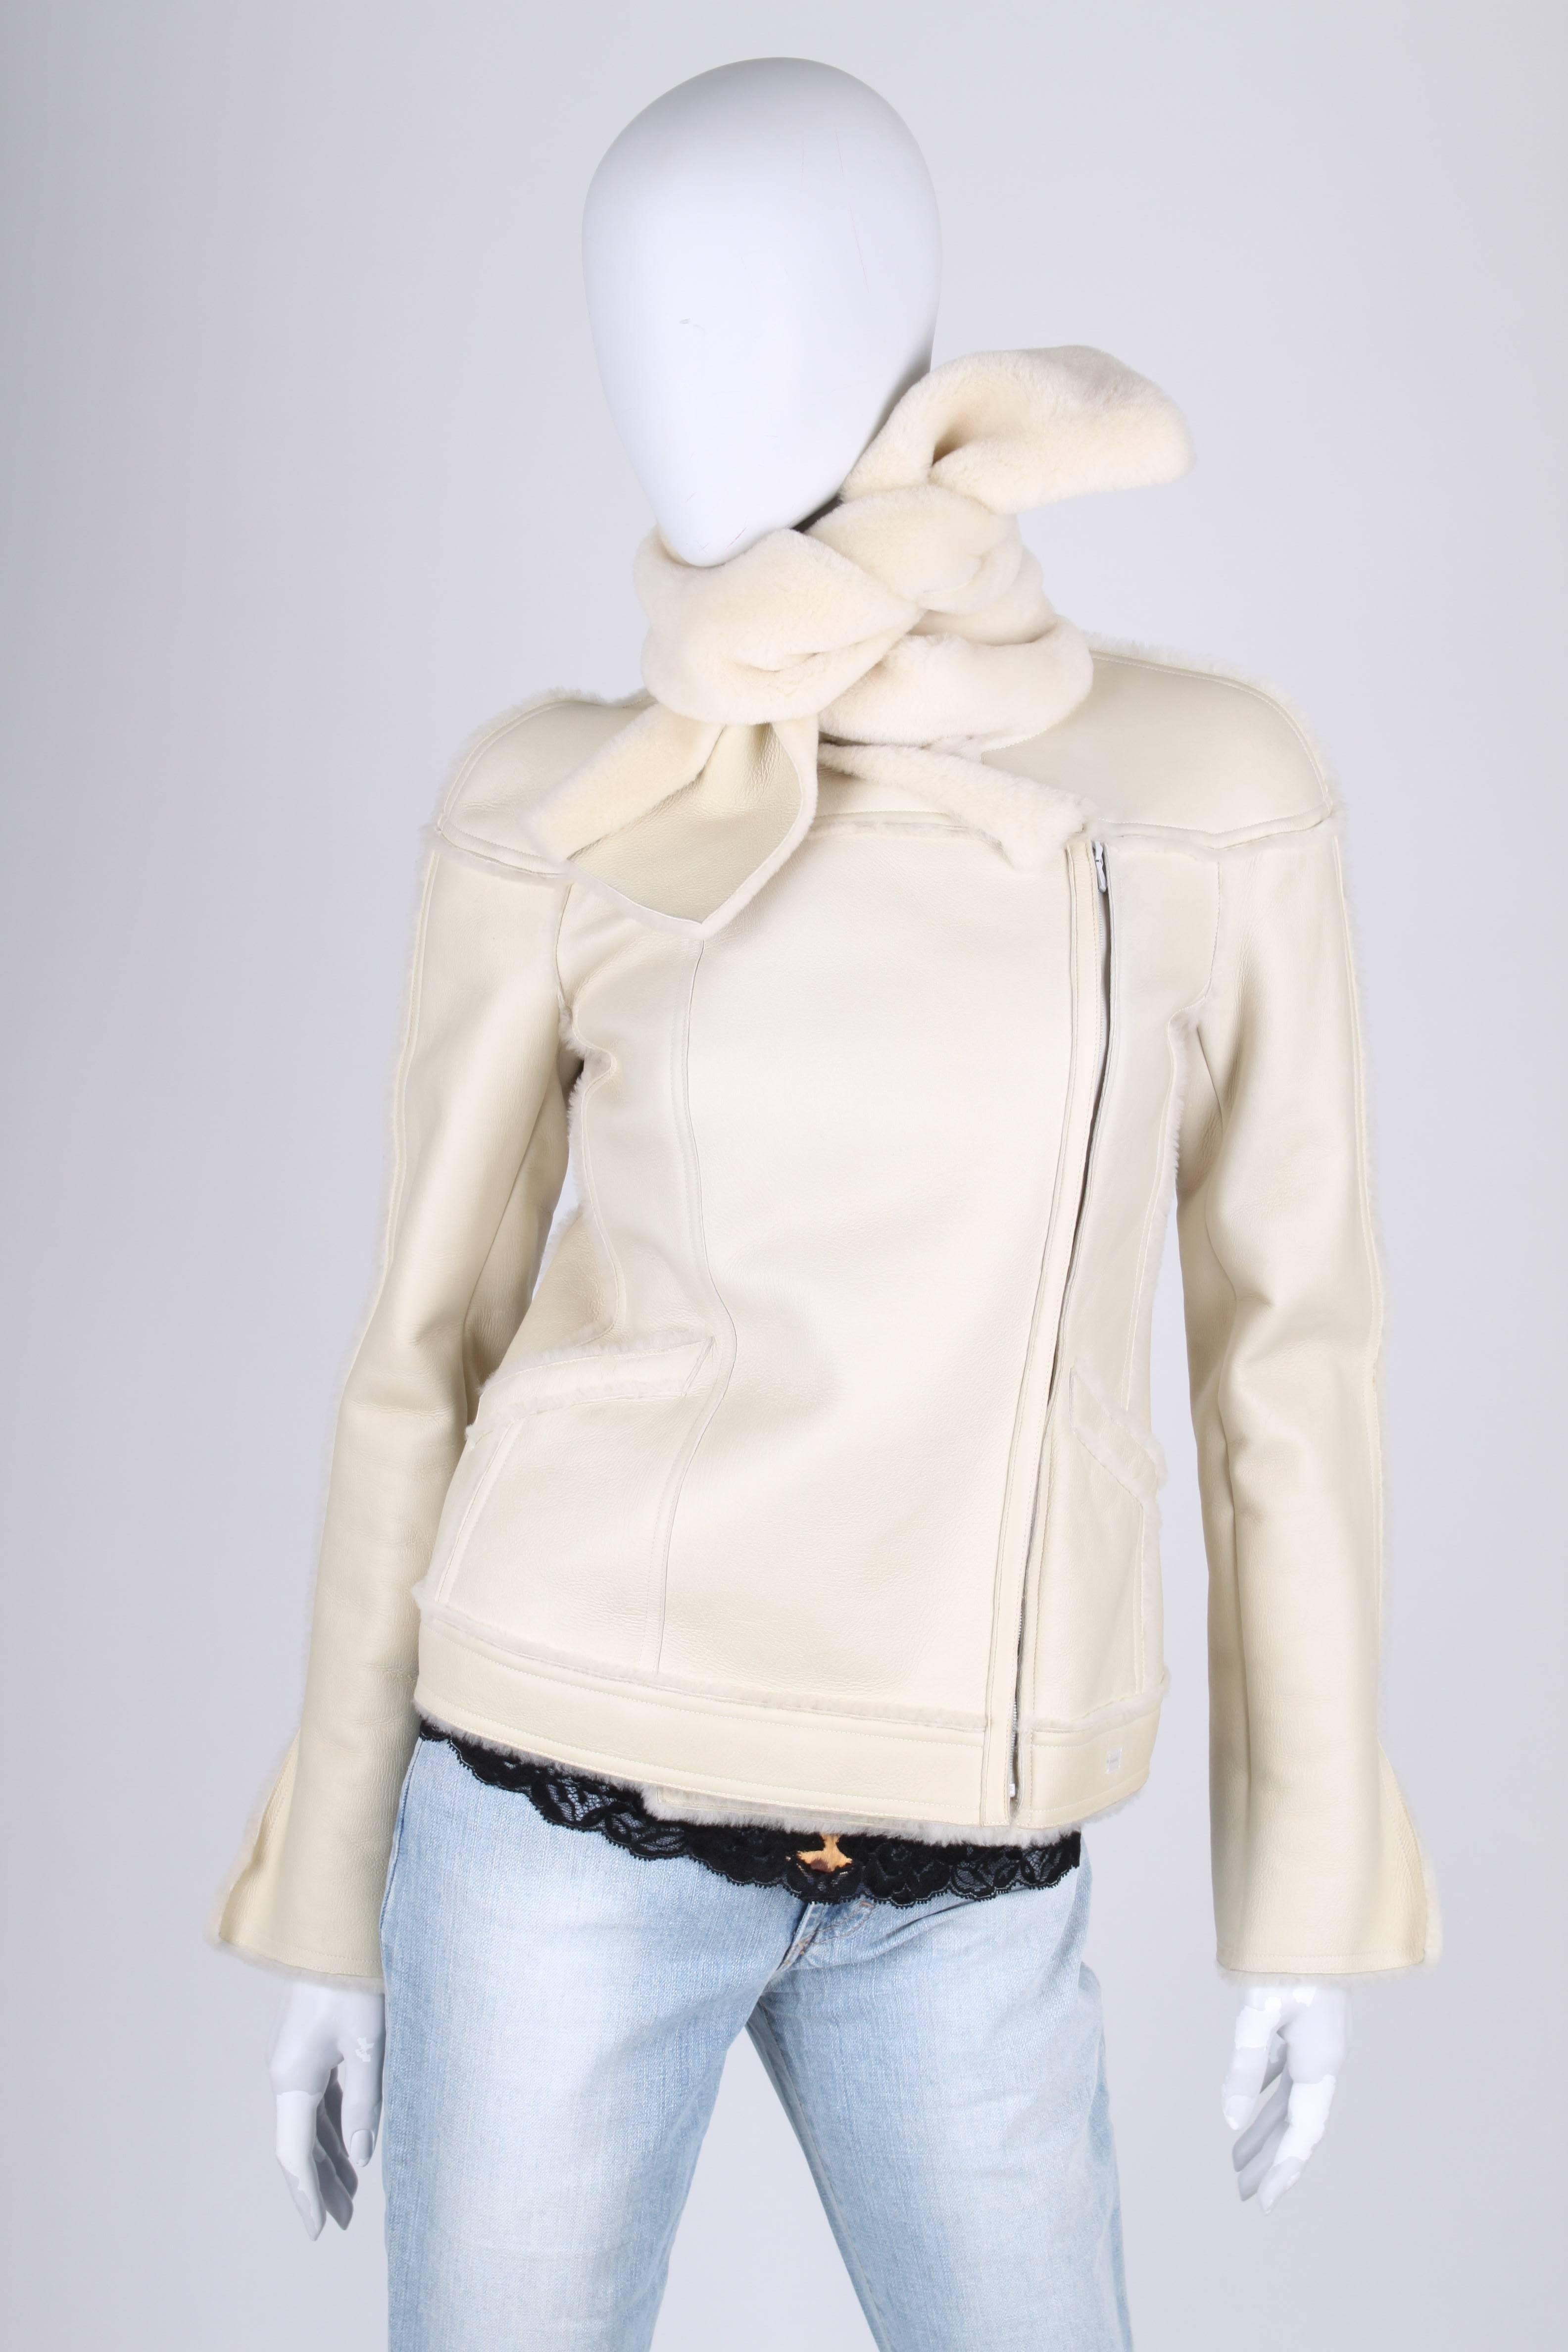 Chanel Lammy Coat - off-white In Excellent Condition For Sale In Baarn, NL